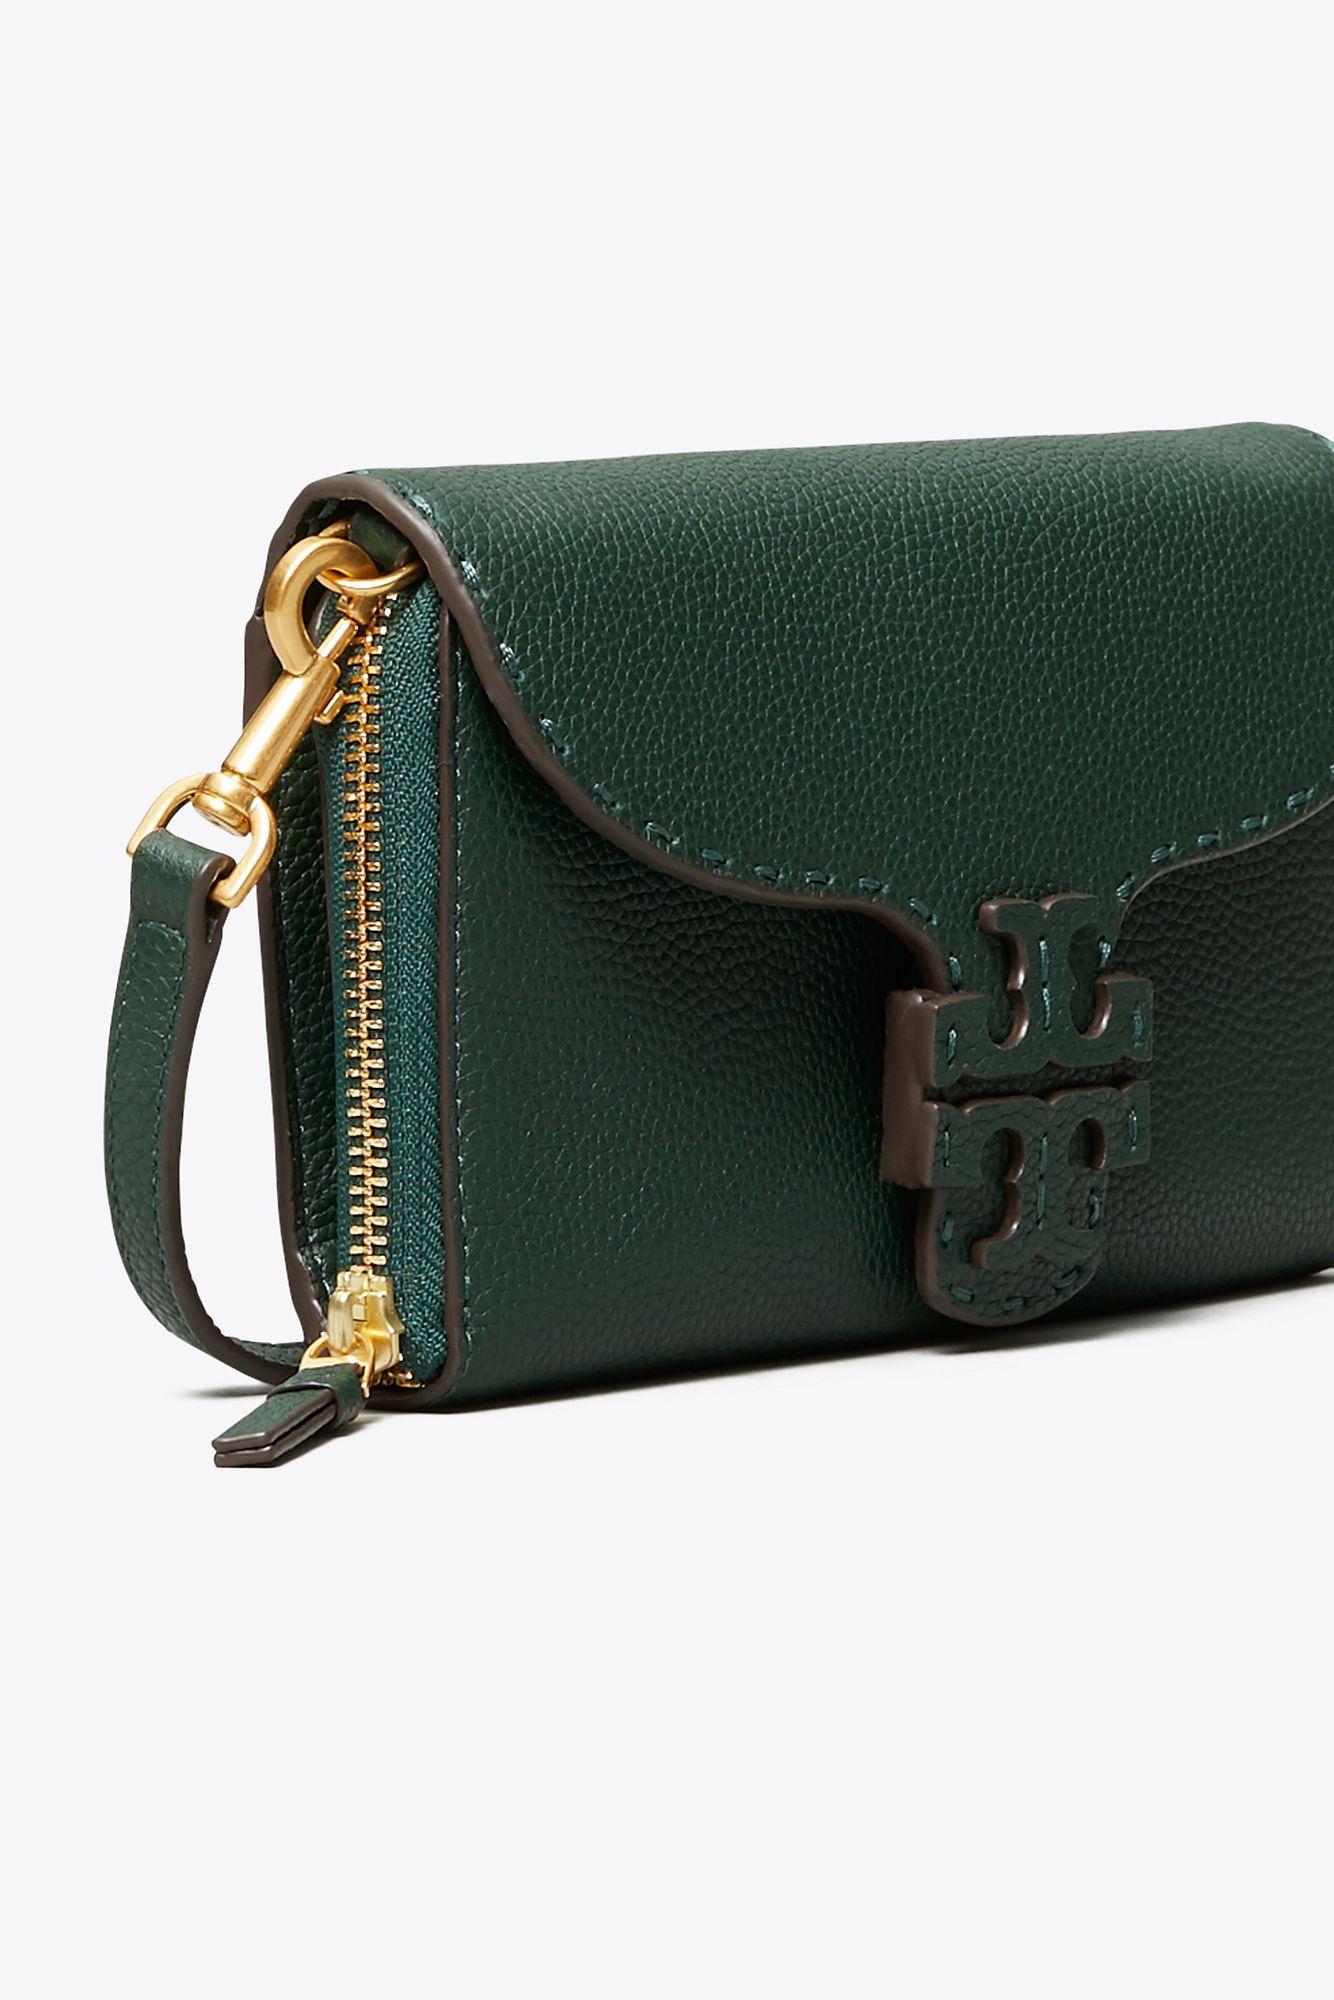 Tory Burch Leather Mcgraw Wallet Crossbody in Green - Lyst